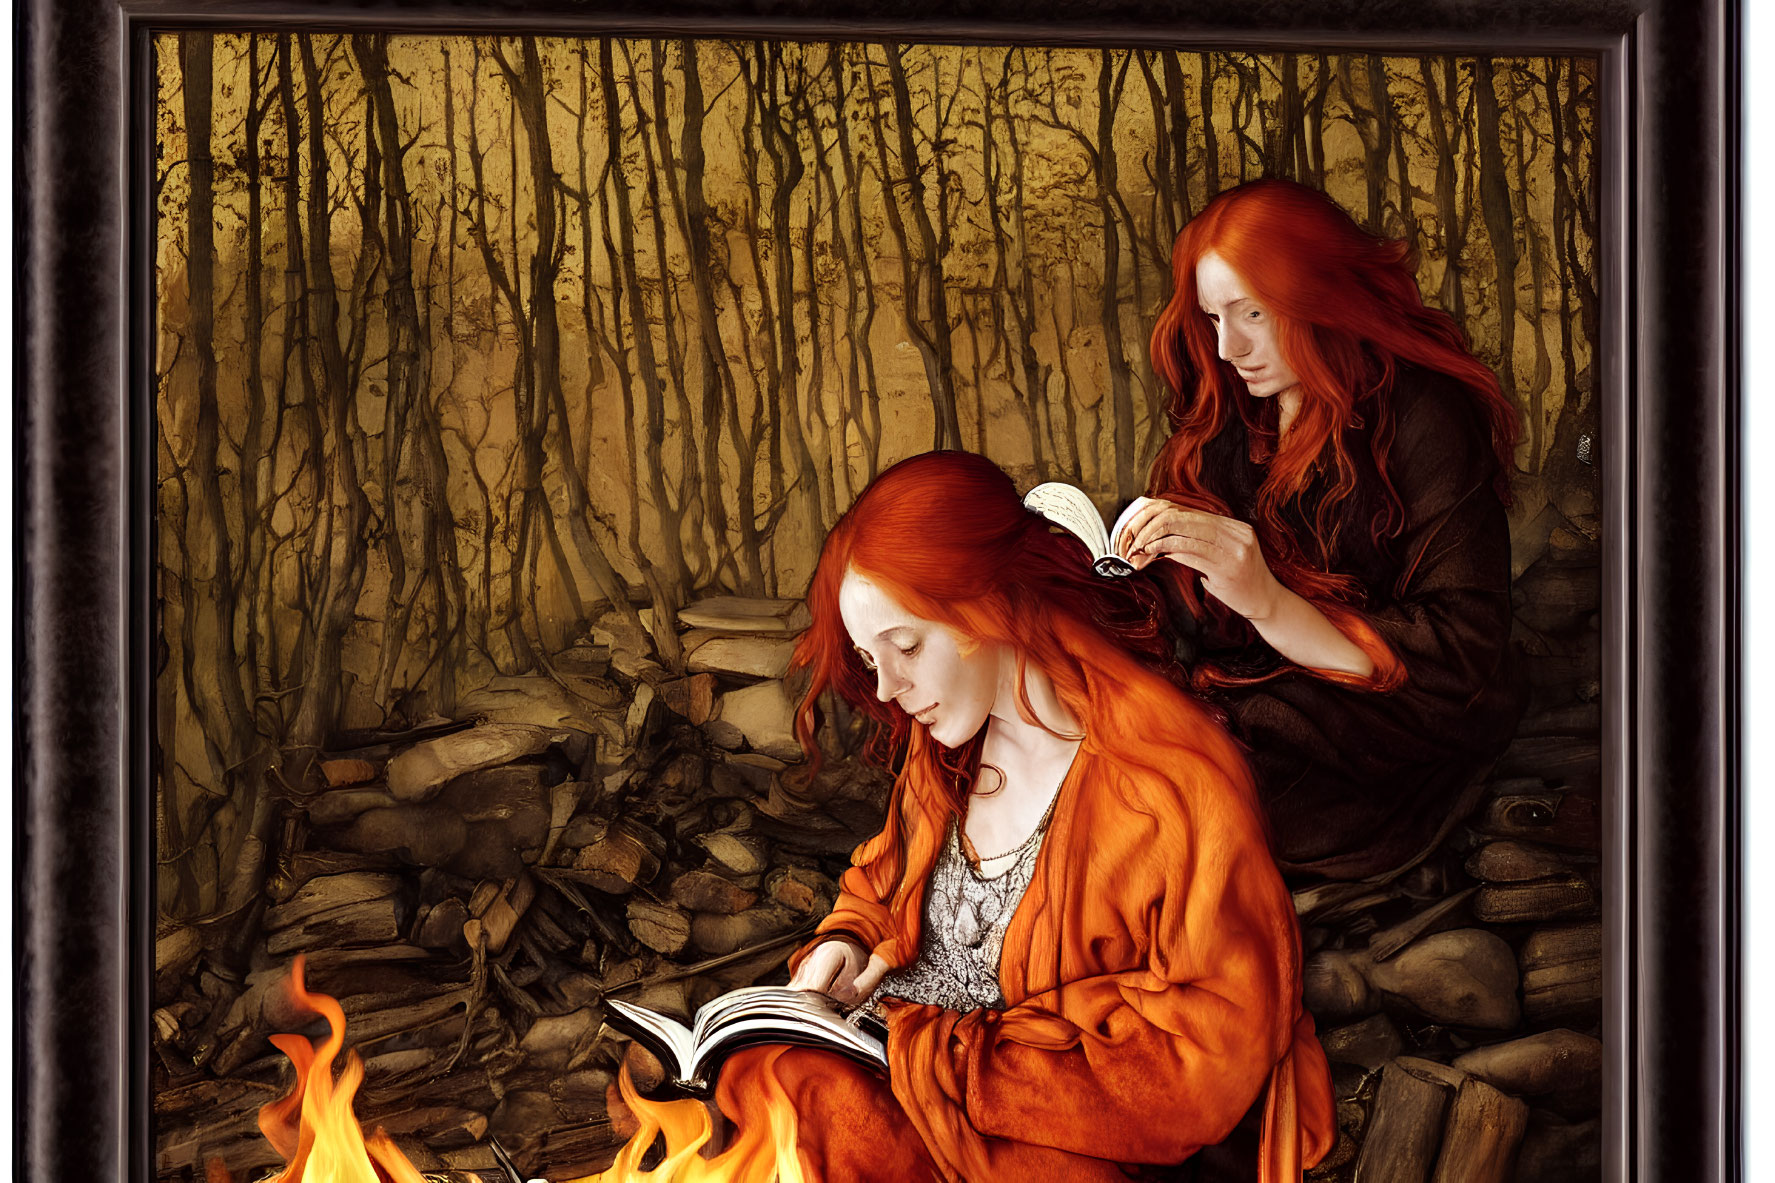 Two red-haired individuals in autumnal forest setting with fire and hair braiding, dark border.